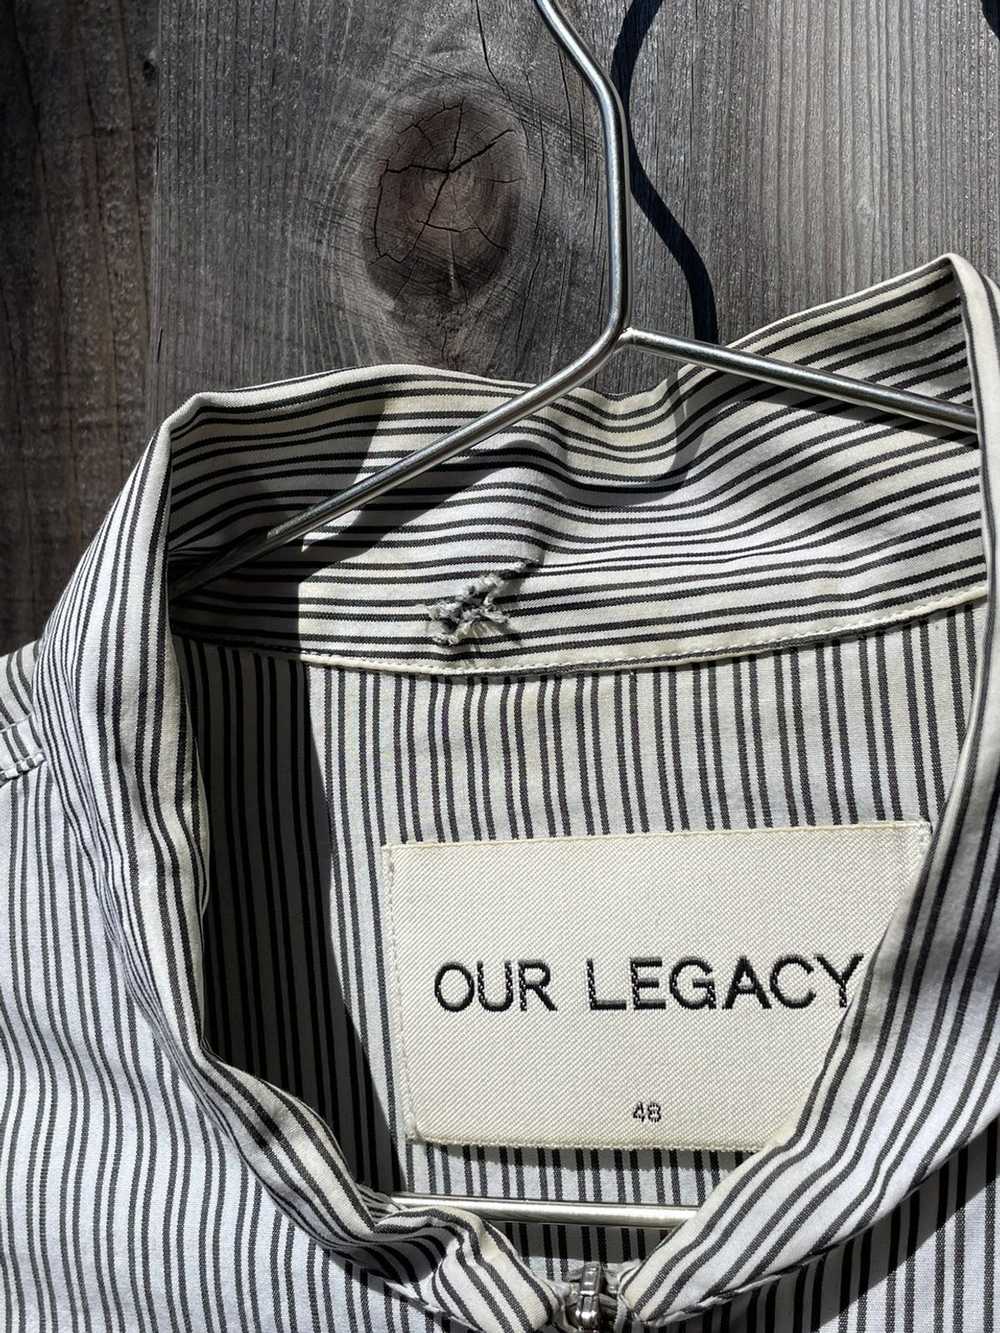 Our Legacy SS15 Pinstripe Shawl - image 3